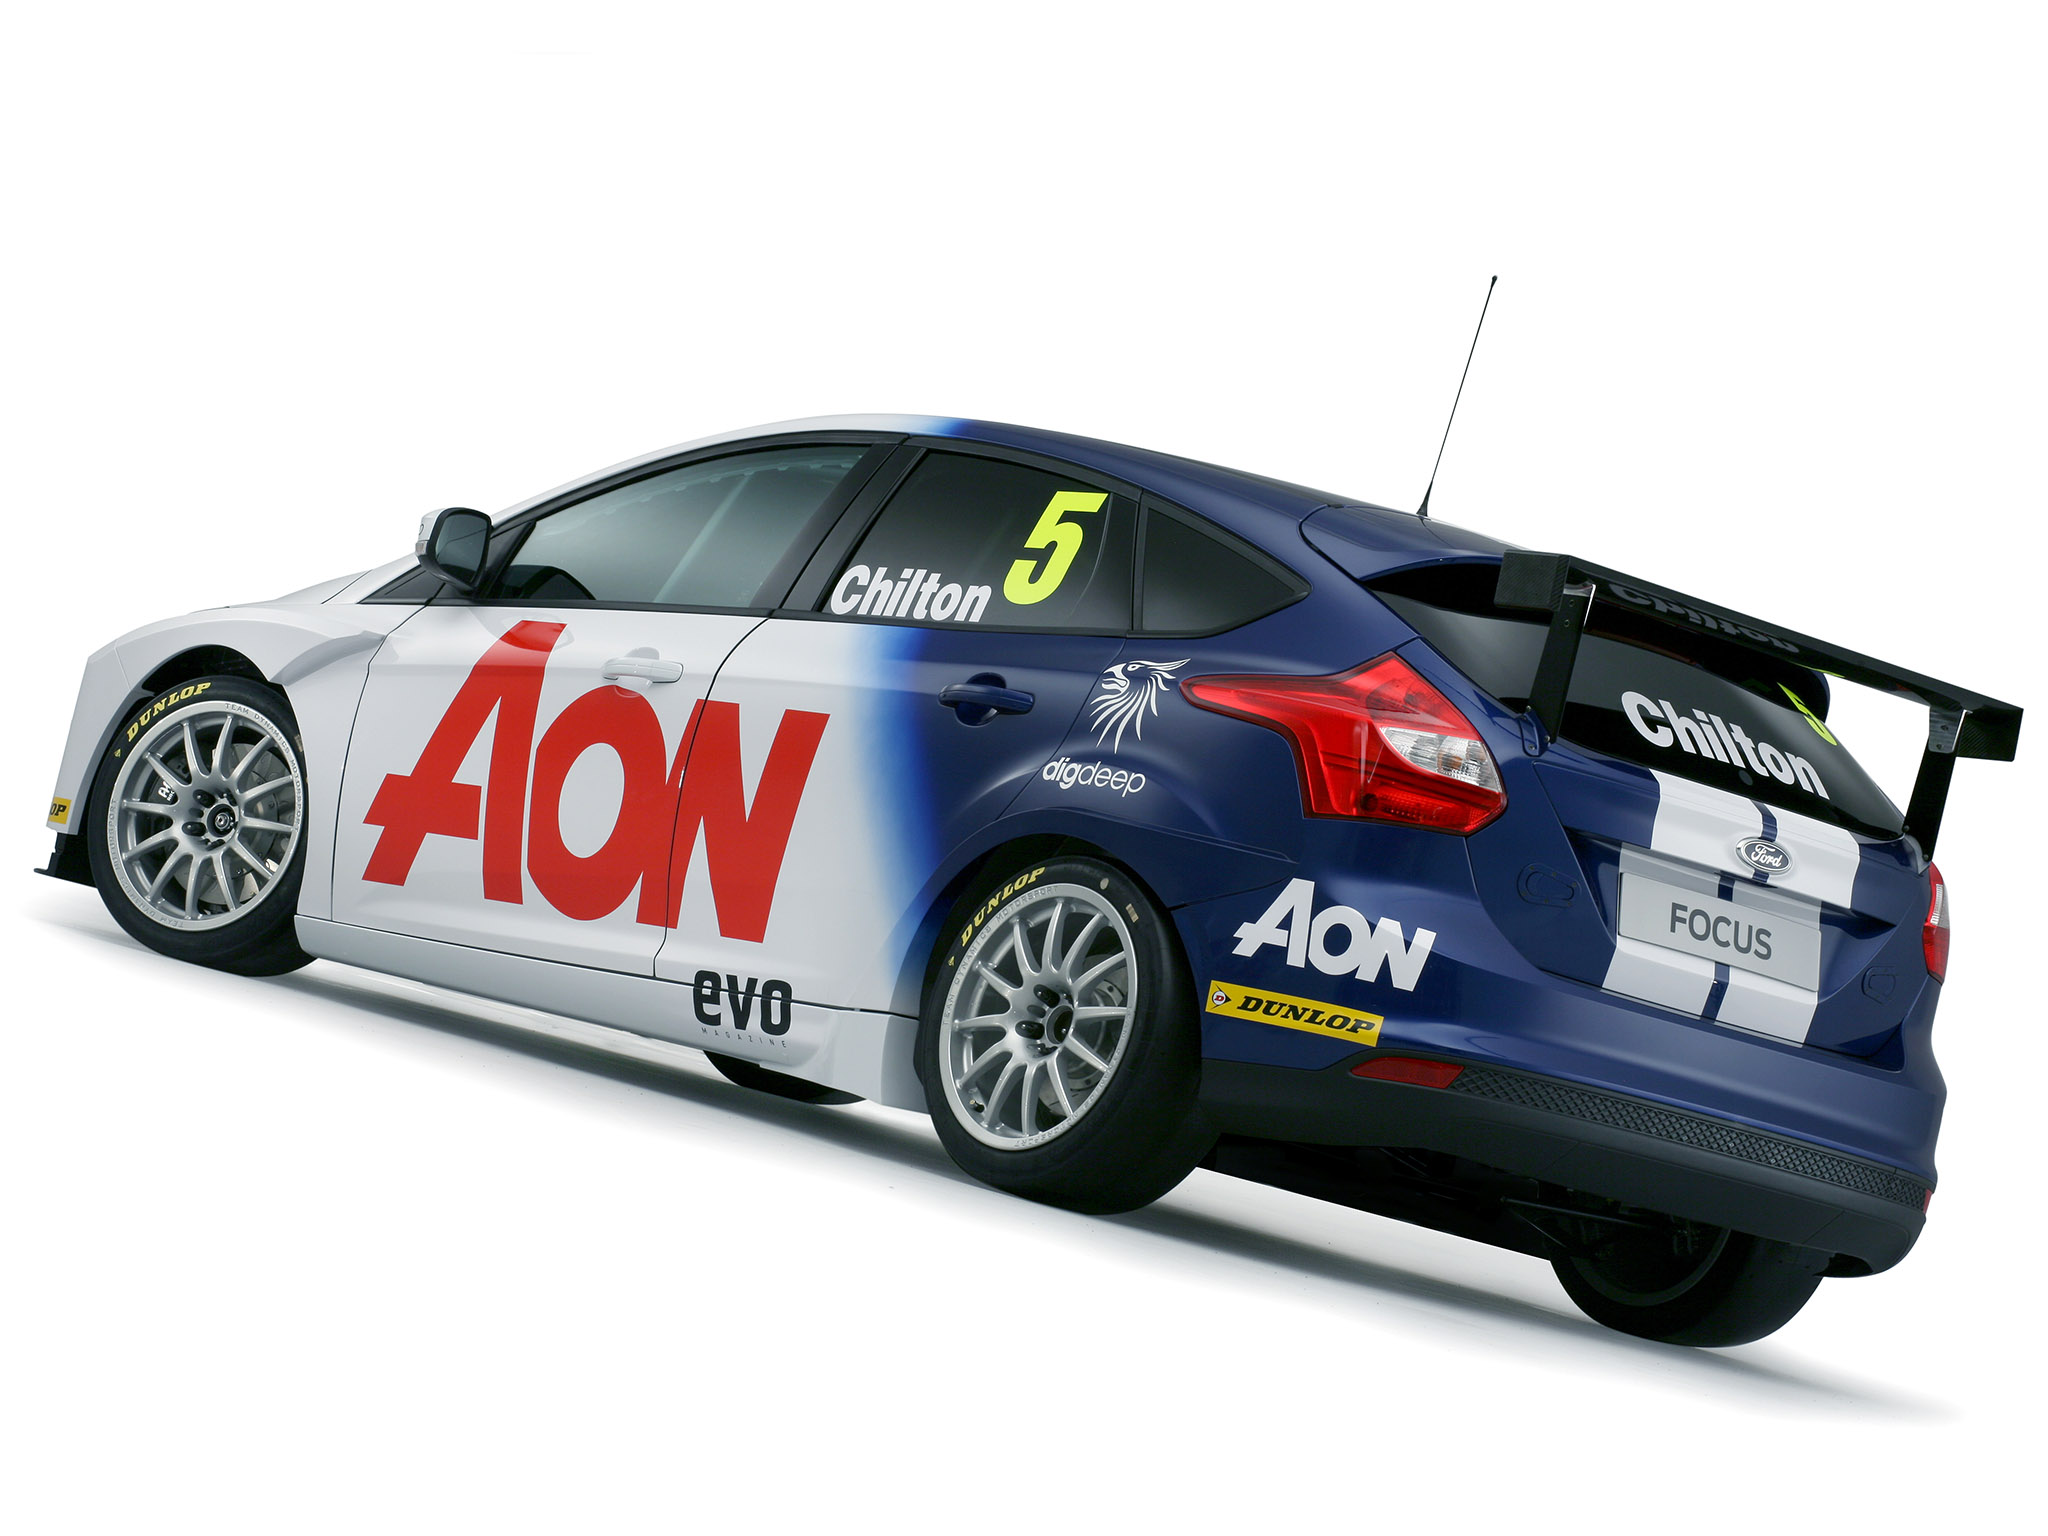 2011, Ford, Focus, Touring, Race, Racing, Tuning Wallpaper